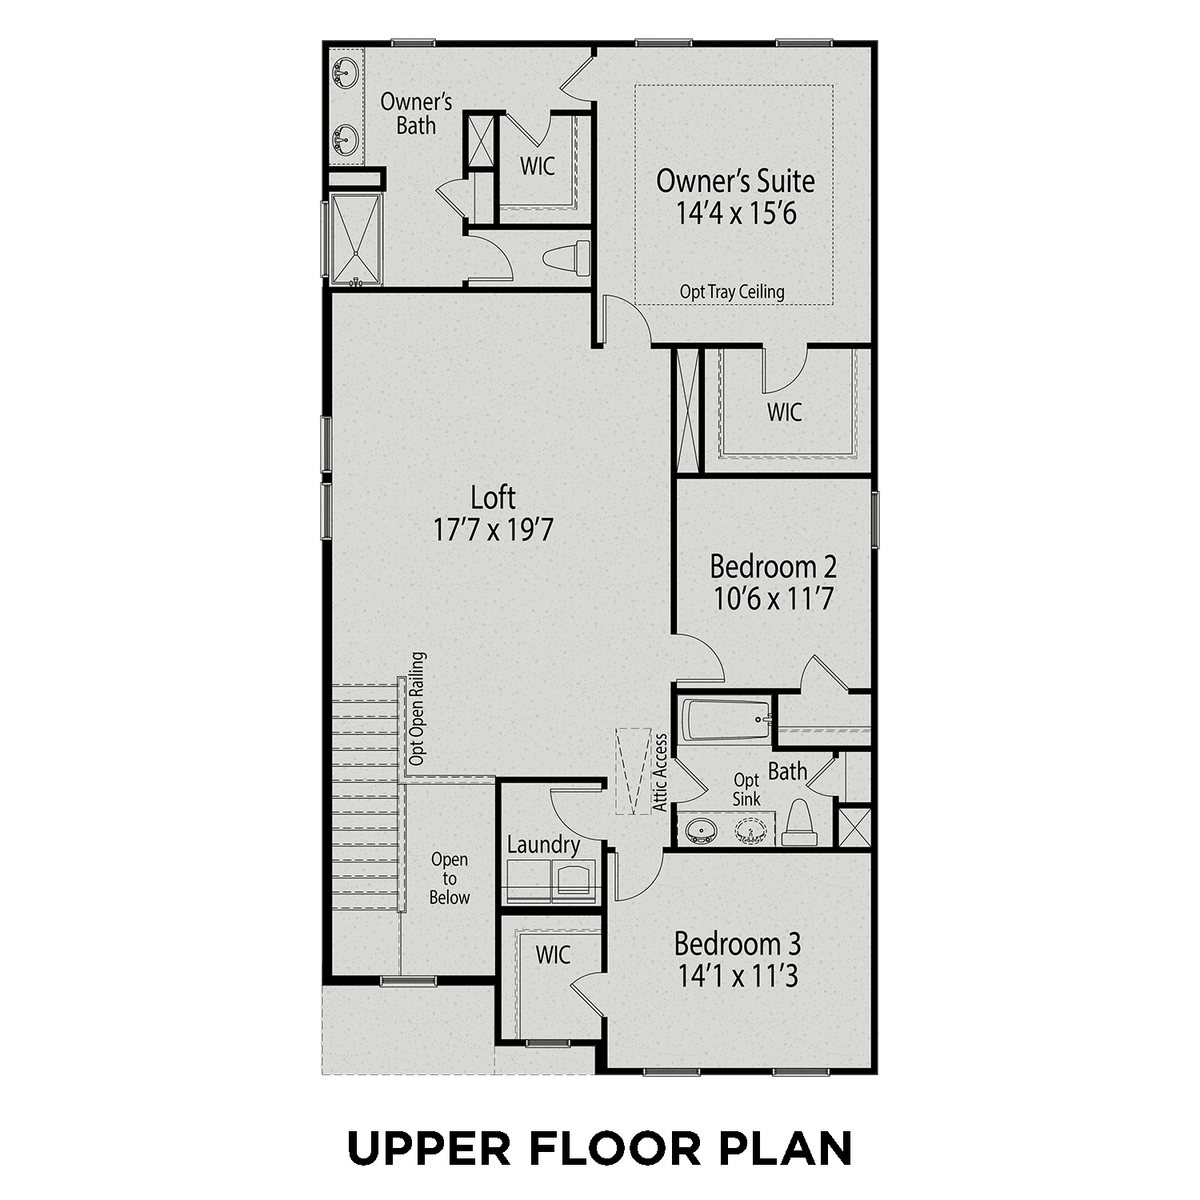 2 - The Adalynn B floor plan layout for 280 Old Fashioned Way in Davidson Homes' Wellers Knoll community.